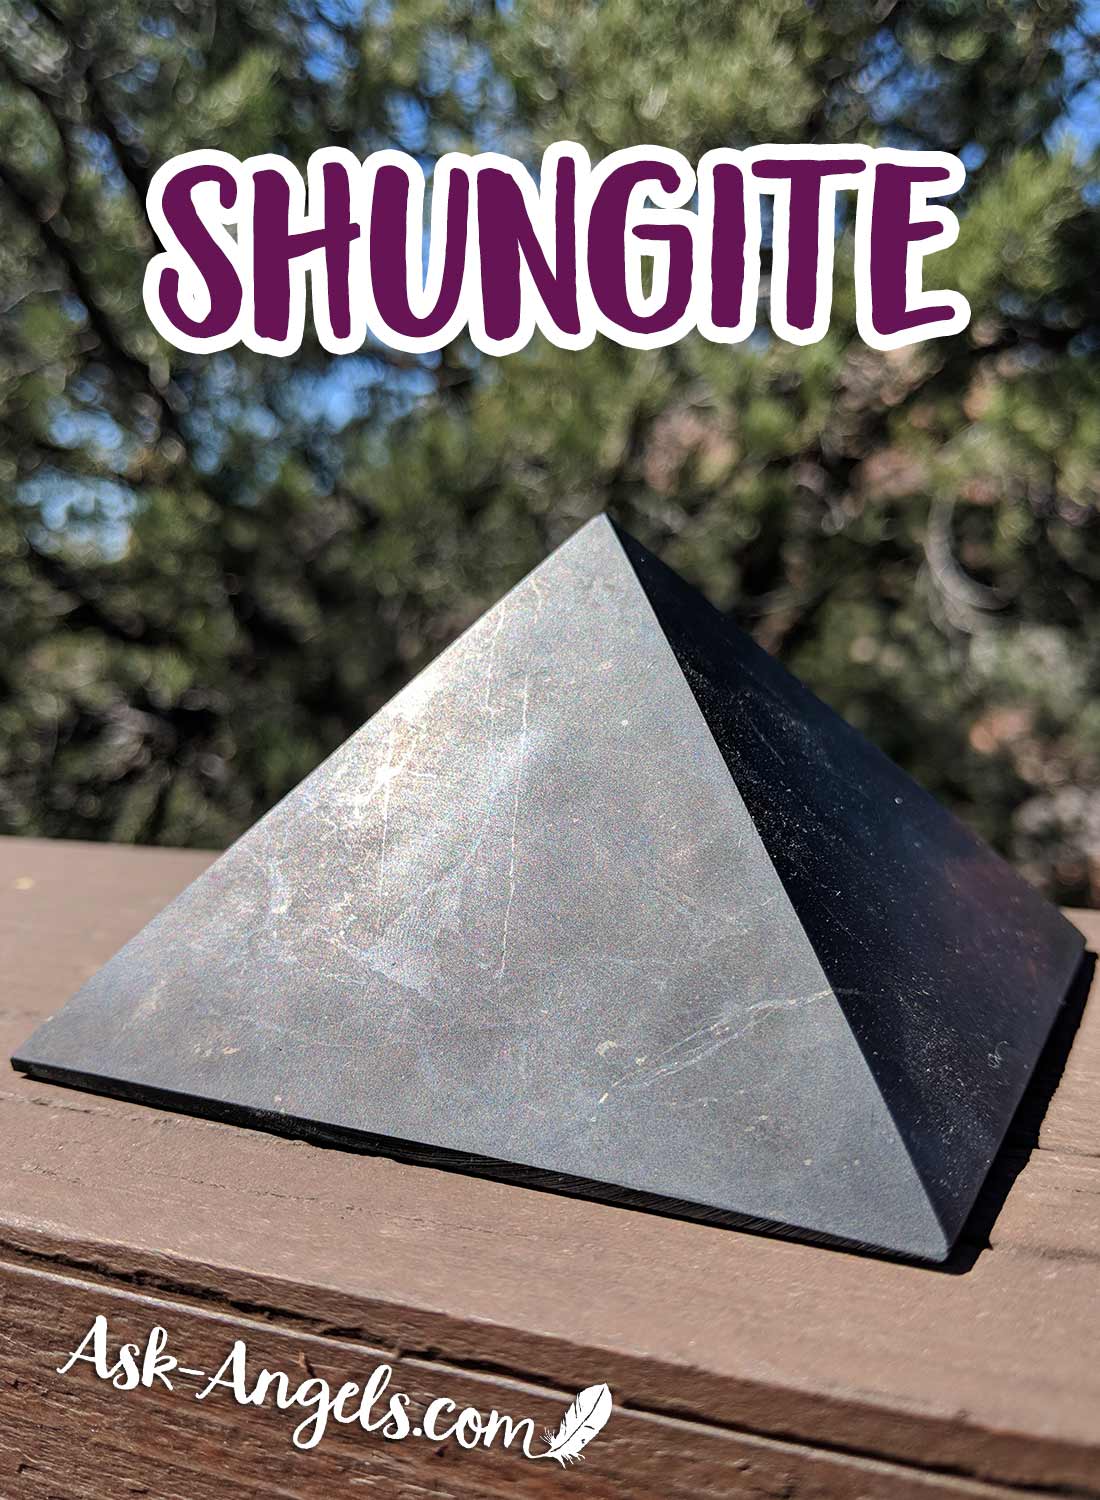 Shungite- Crystals for Protection